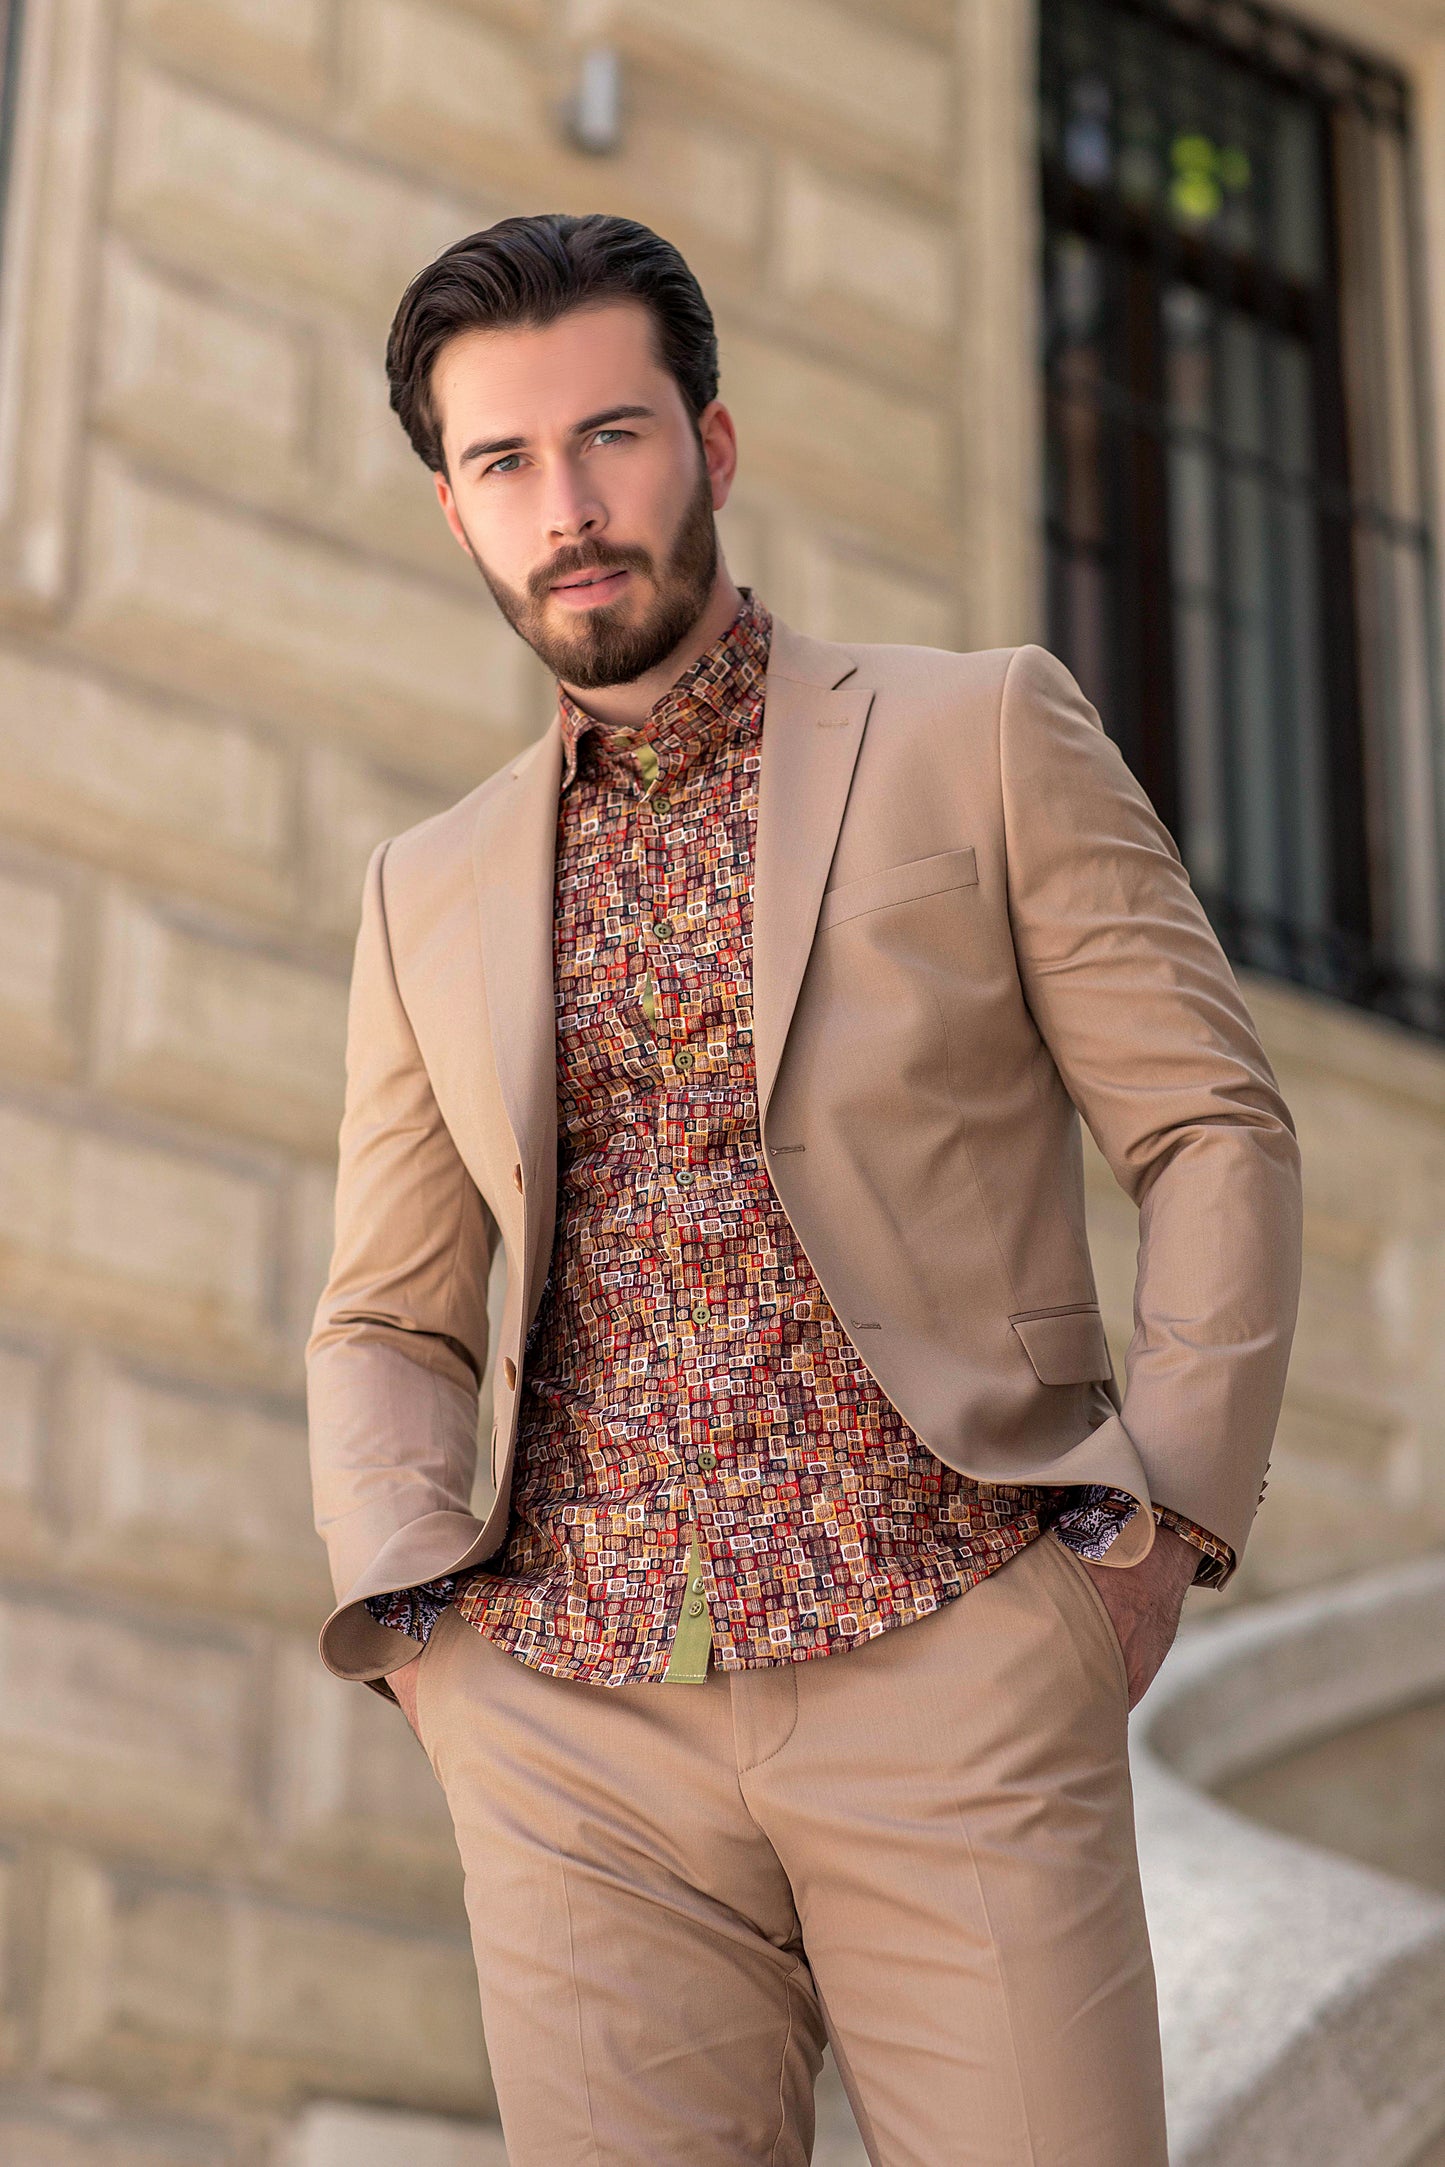 Olive Wood Moda Dress Shirt with suit